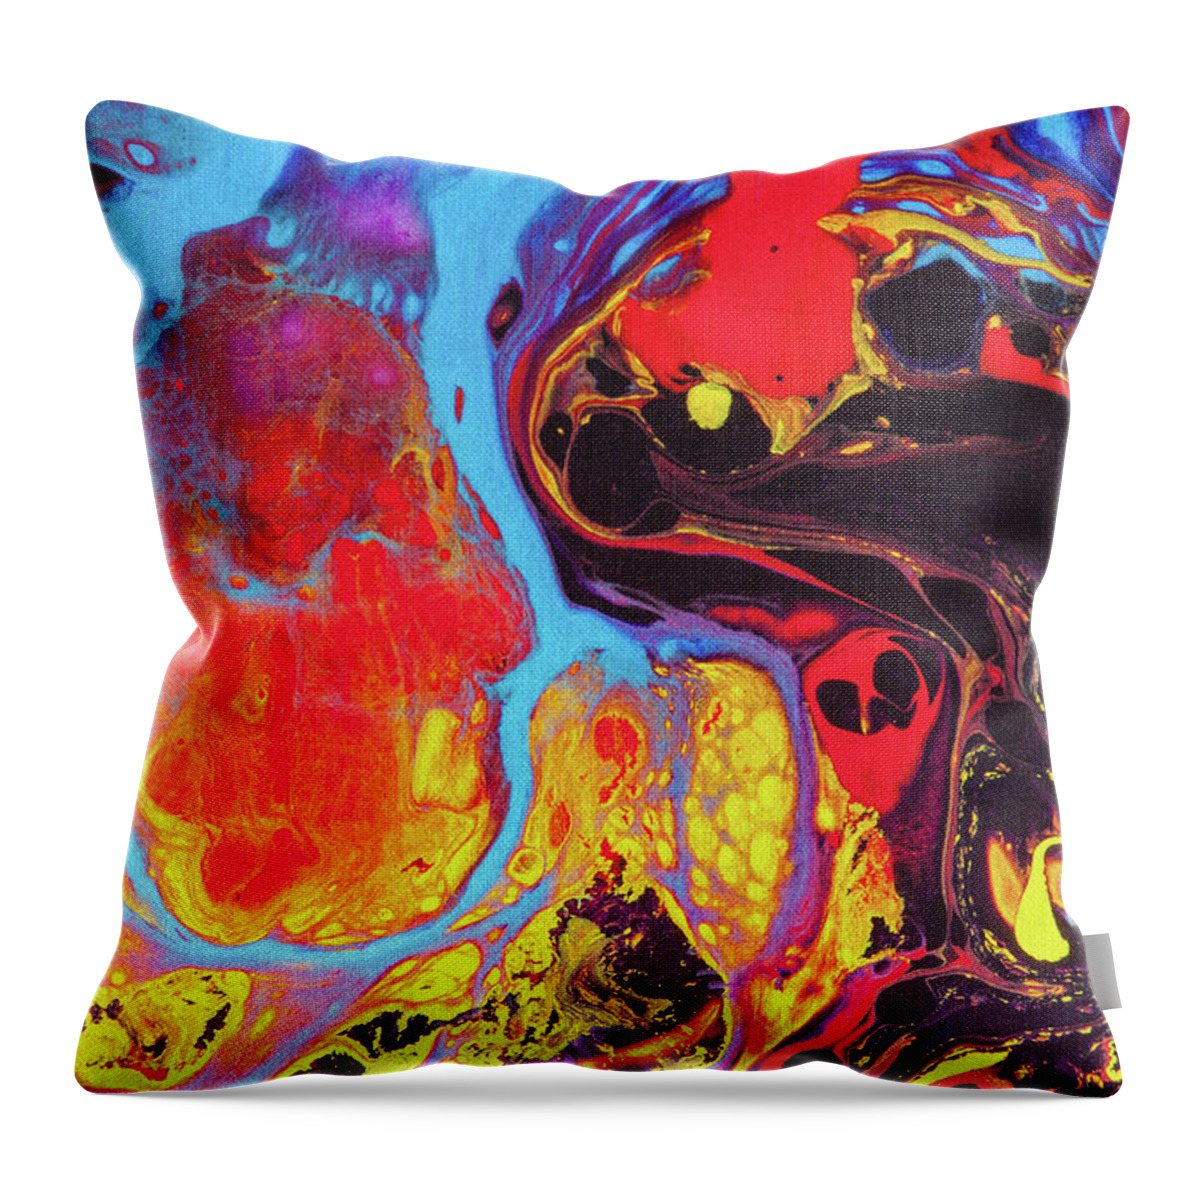 Art Throw Pillow featuring the painting Shelter From The Storm - Colorful Modern Art Painting by Modern Abstract